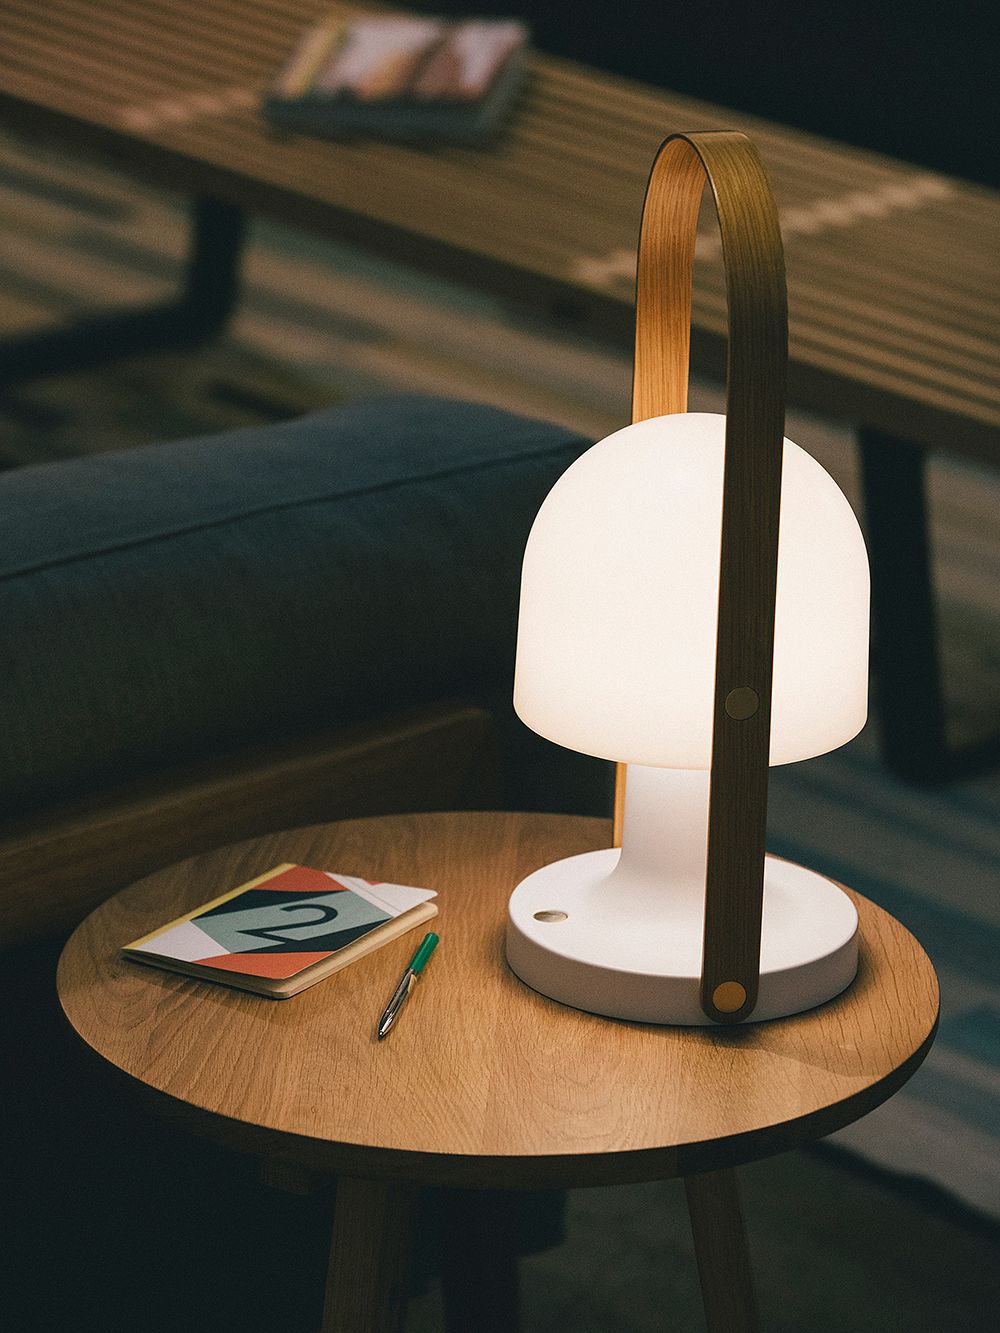 An image of Marset's FollowMe lamp on the table, as part of the summer home decor.